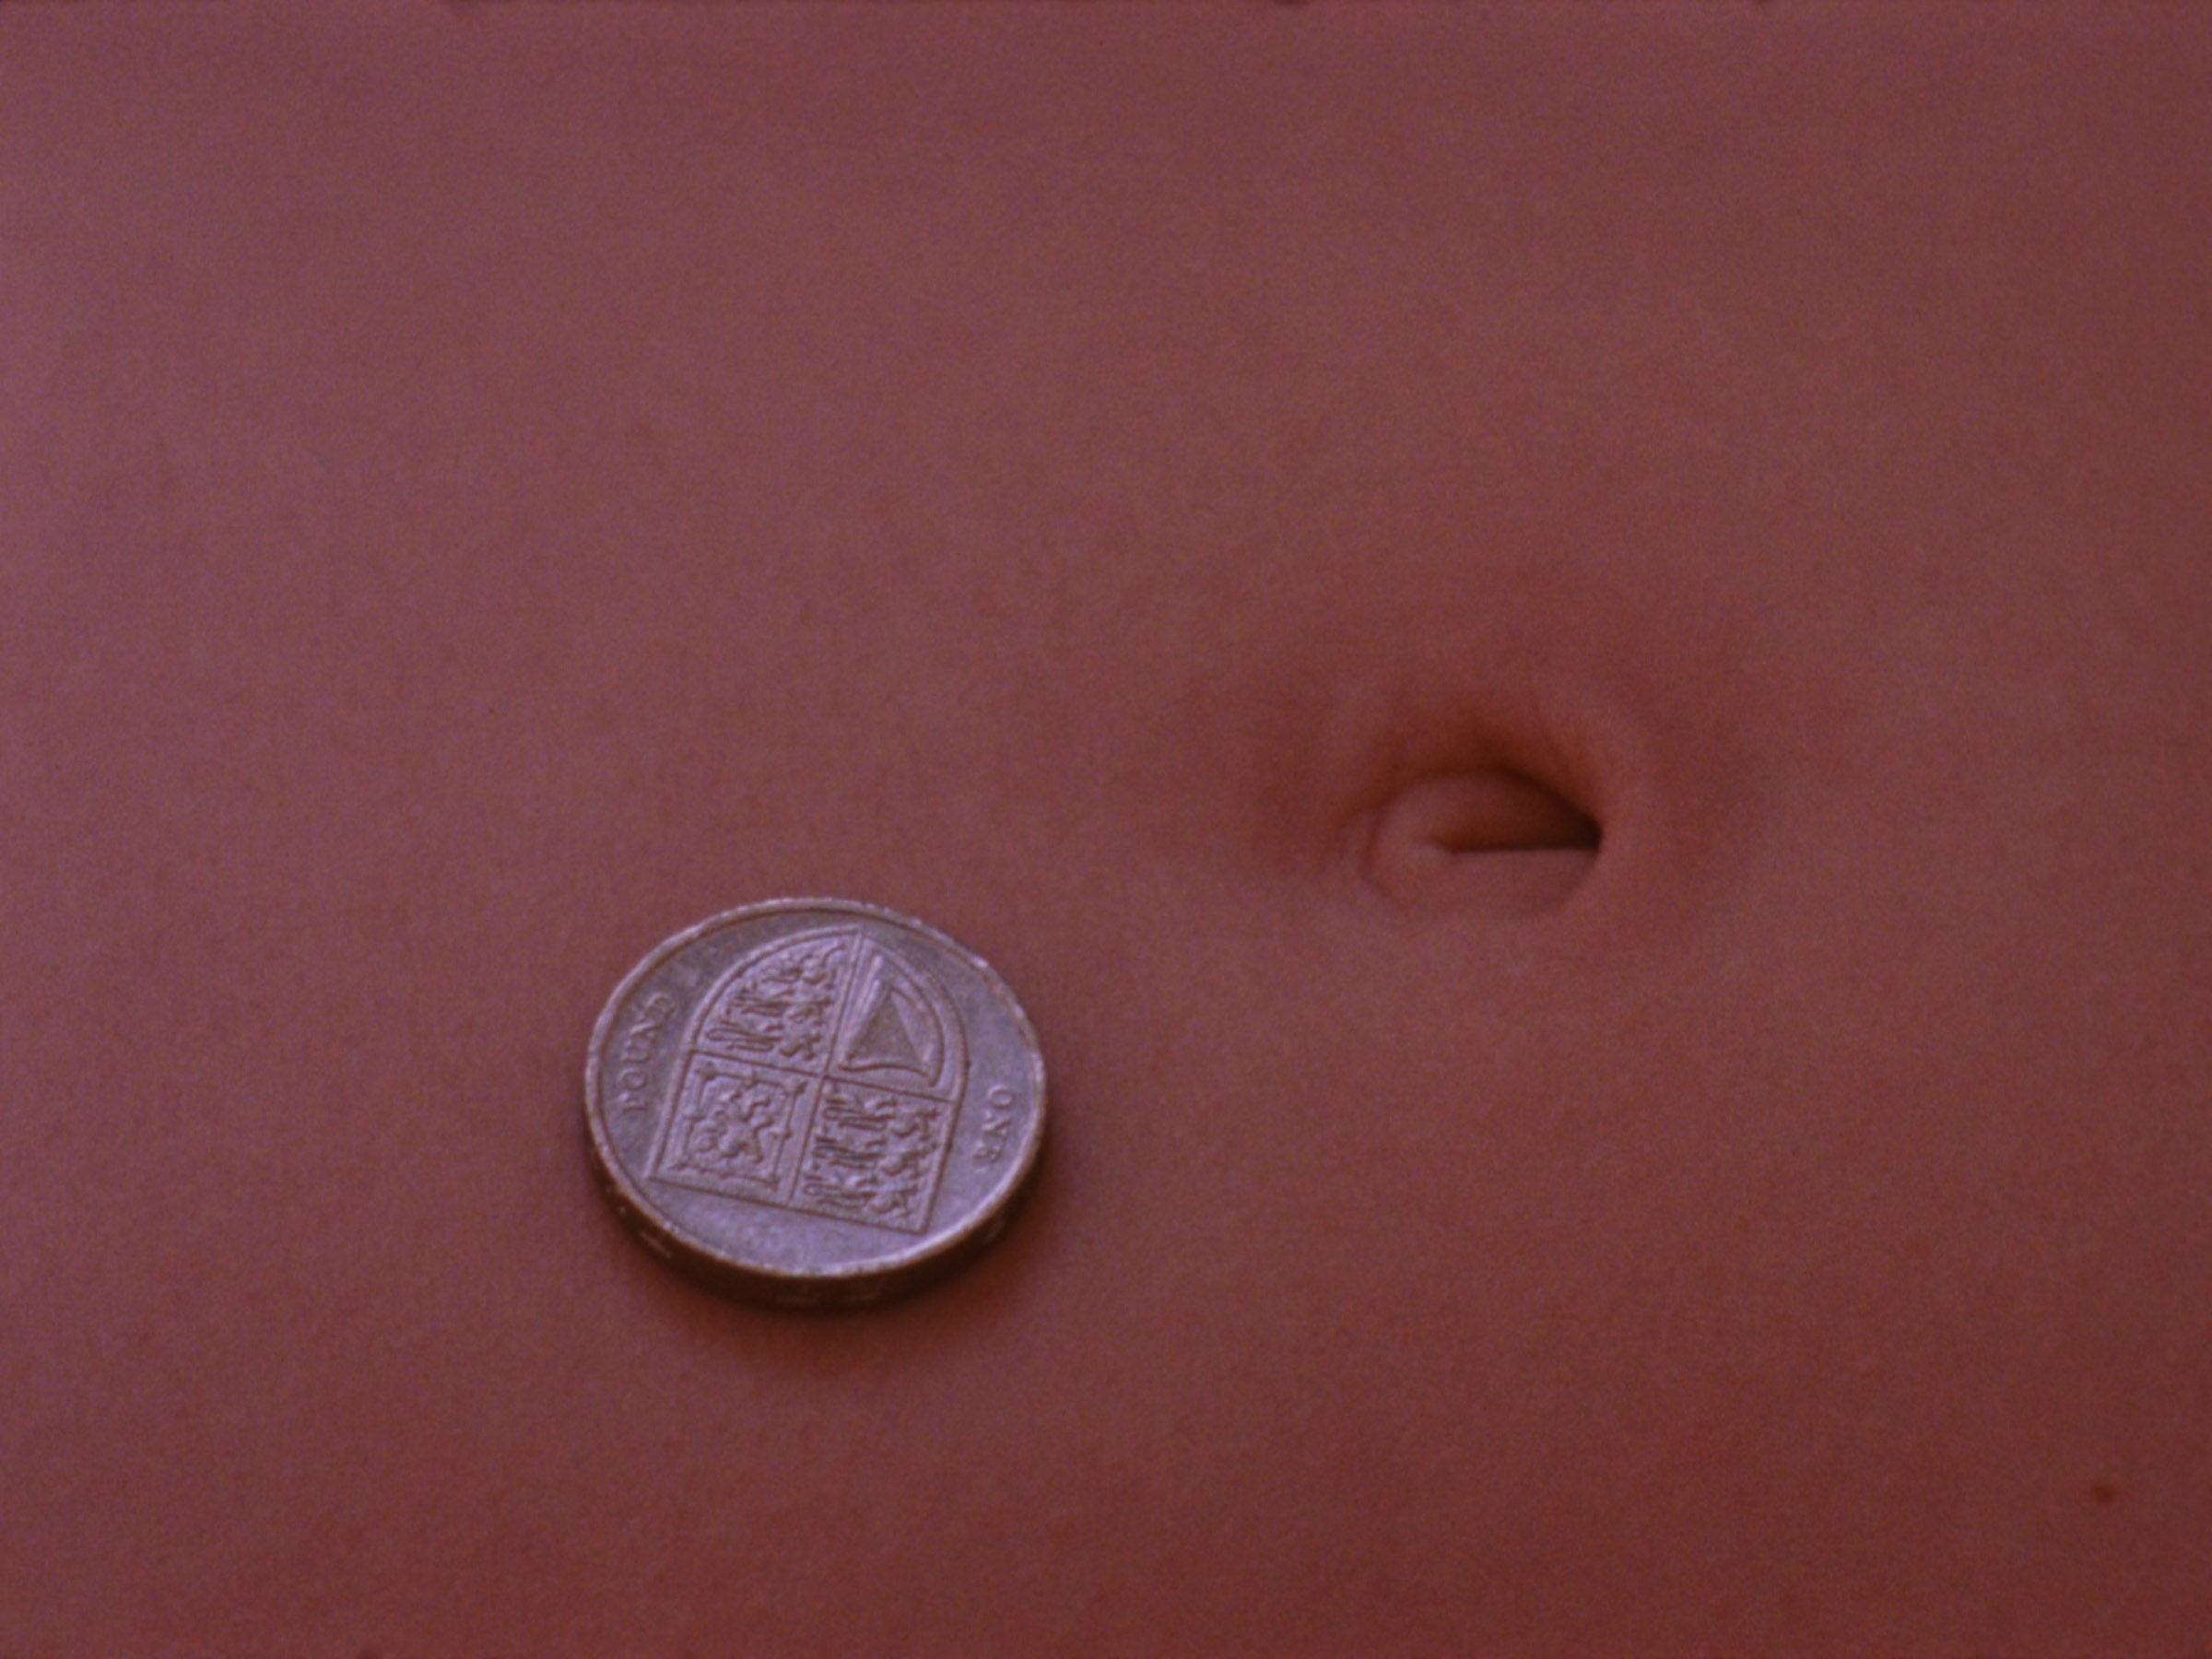 16 mm film still: a one pound coin and and bellybutton